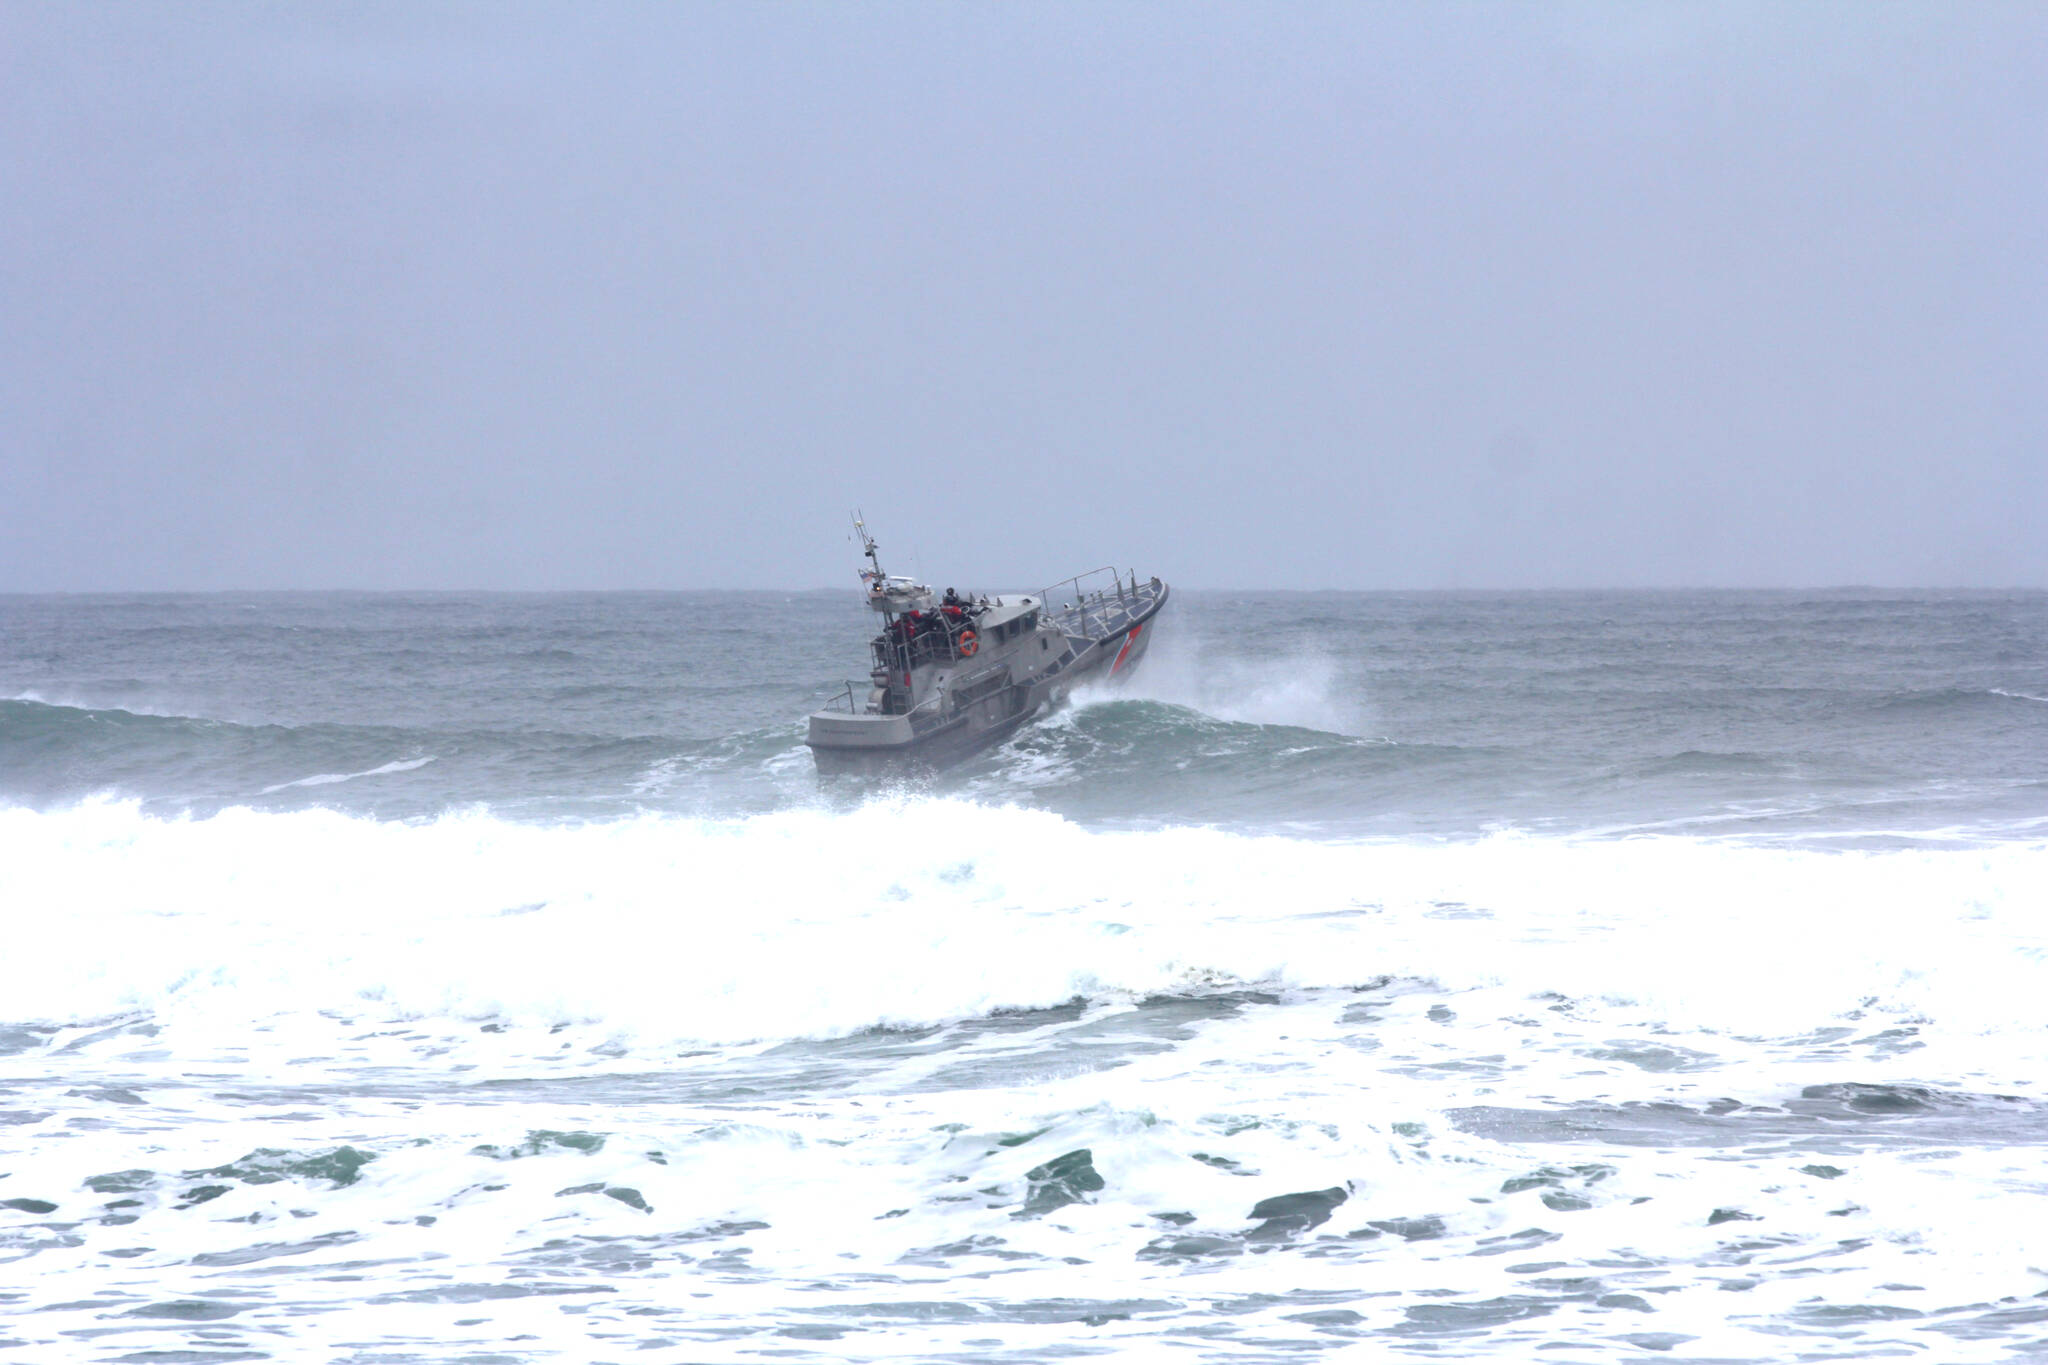 Michael S. Lockett / The Daily World 
U.S. Coast Guard rescue vessels from Station Grays Harbor practice operating in heavy surf conditions on Dec. 9.